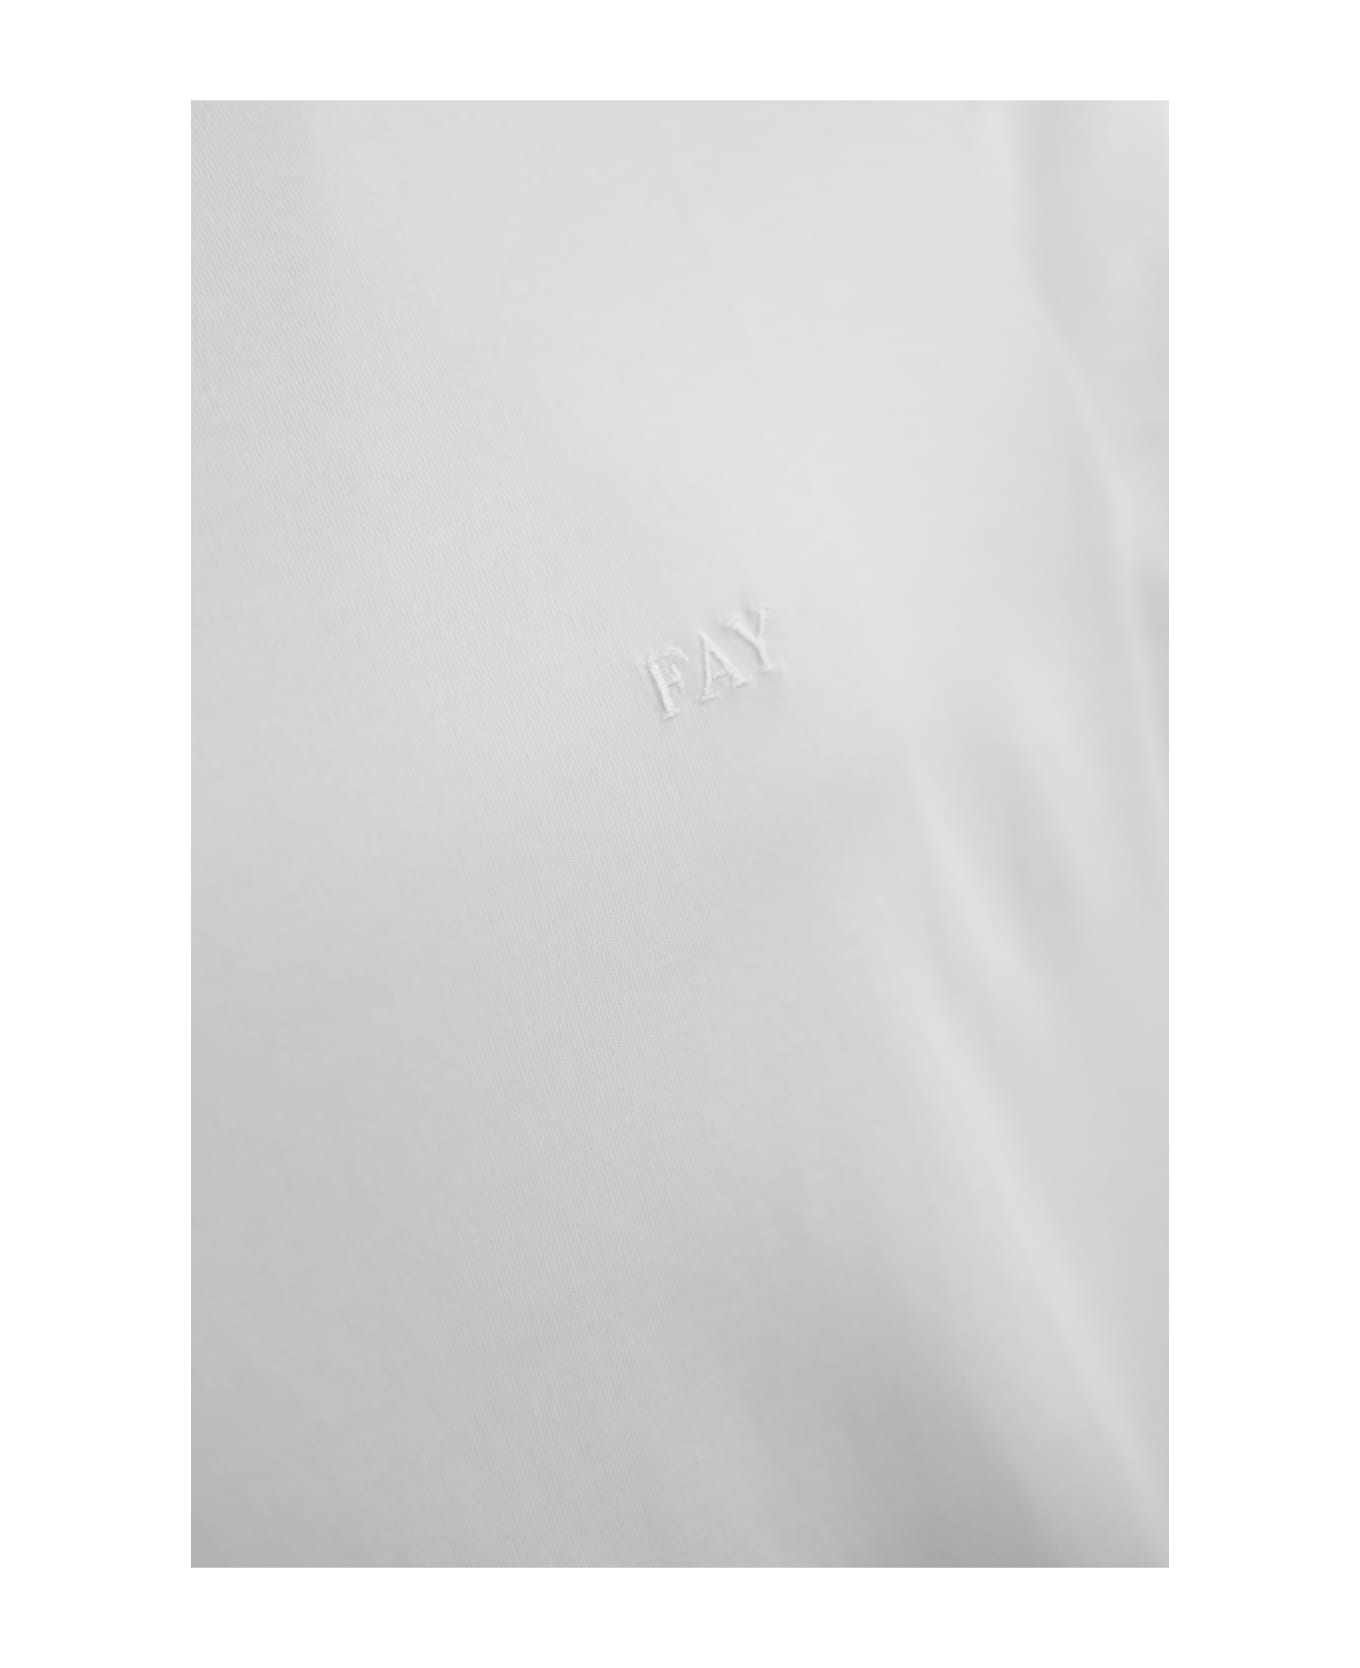 Fay T-shirt With Logo Embroidery - Bianco